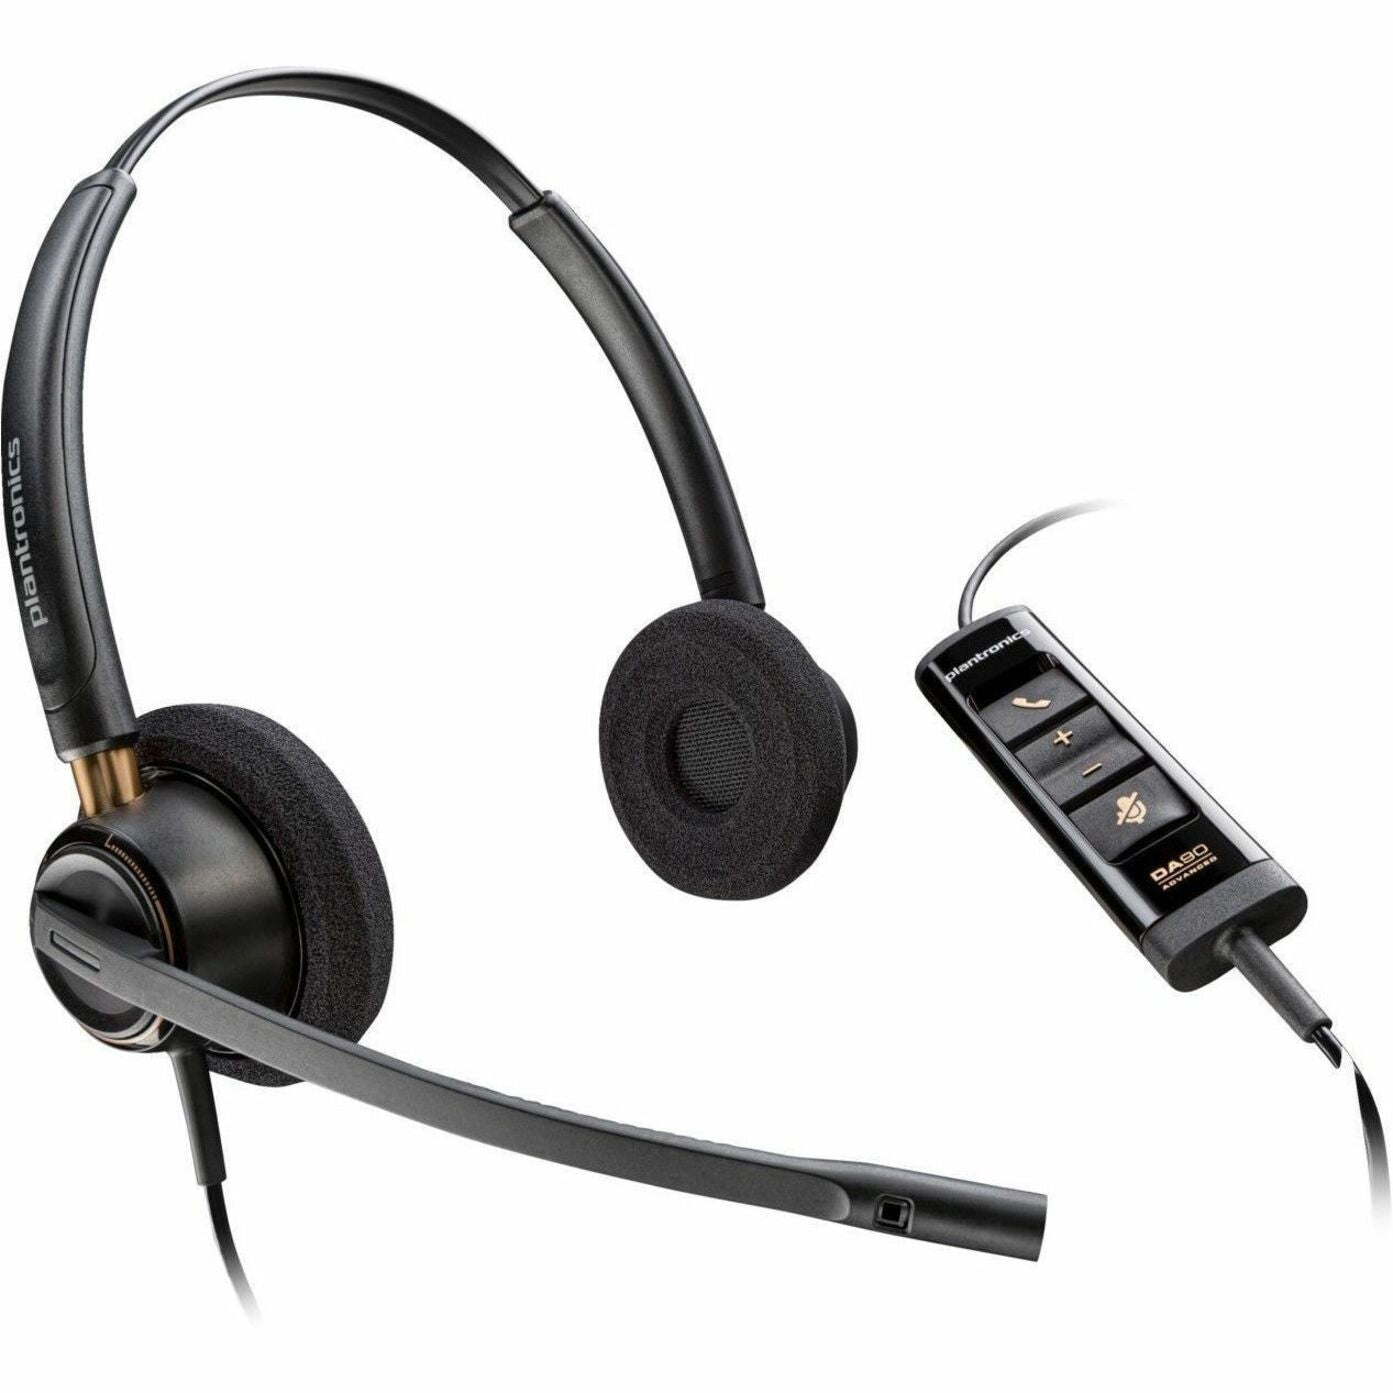 Poly 783R3AA EncorePro 525 Headset, Binaural On-ear/Over-the-ear, USB Type A, for Home, Notebook, Voice Call, Office